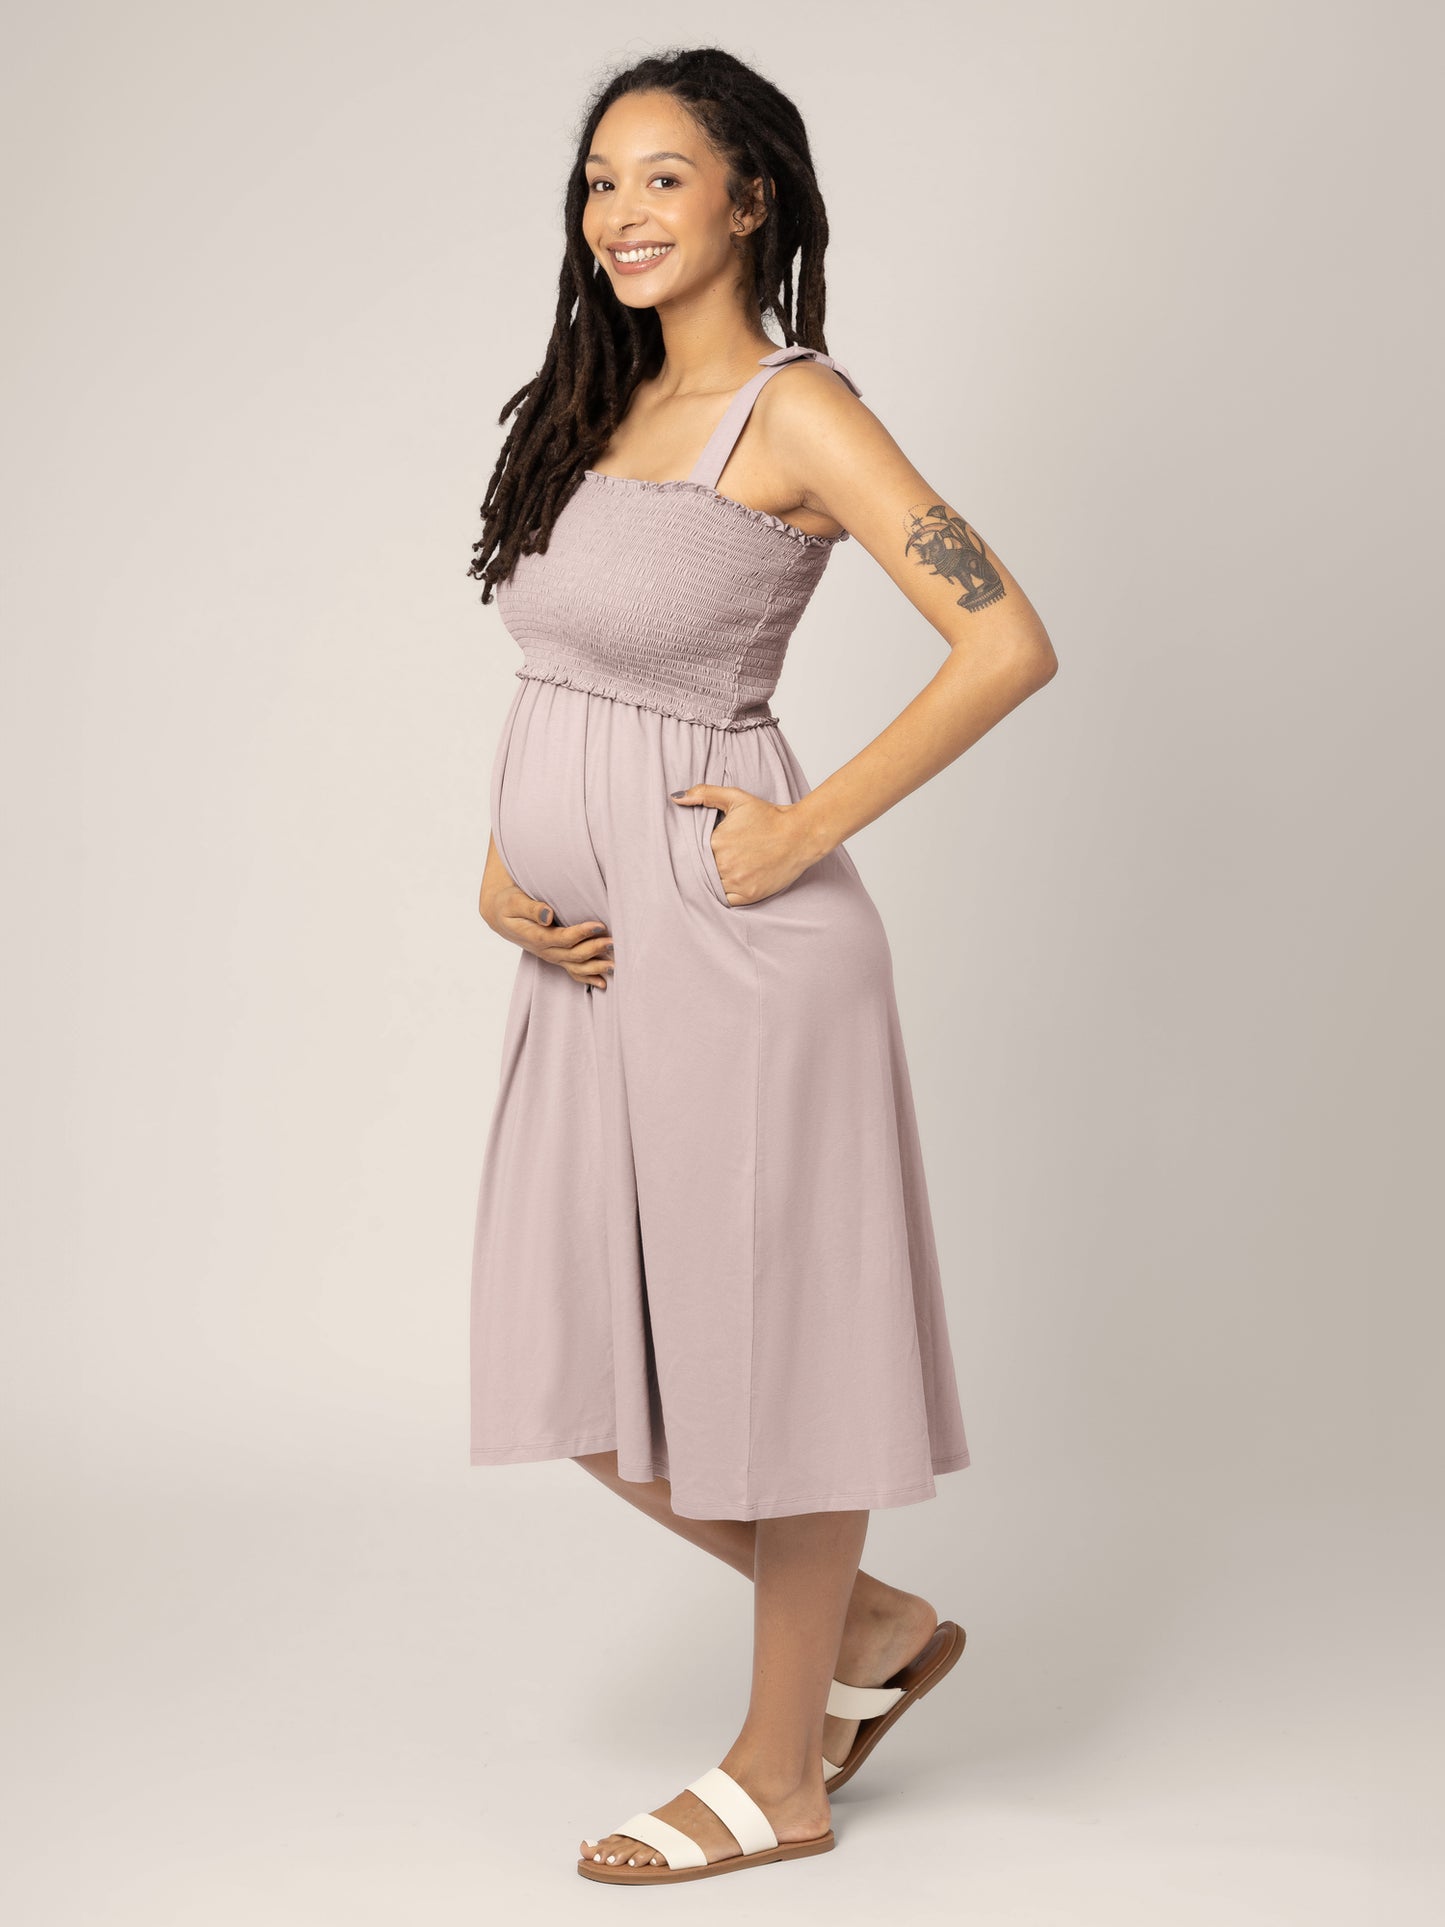 Pregnant model wearing the Sienna Smocked Maternity & Nursing Dress in lilac stone